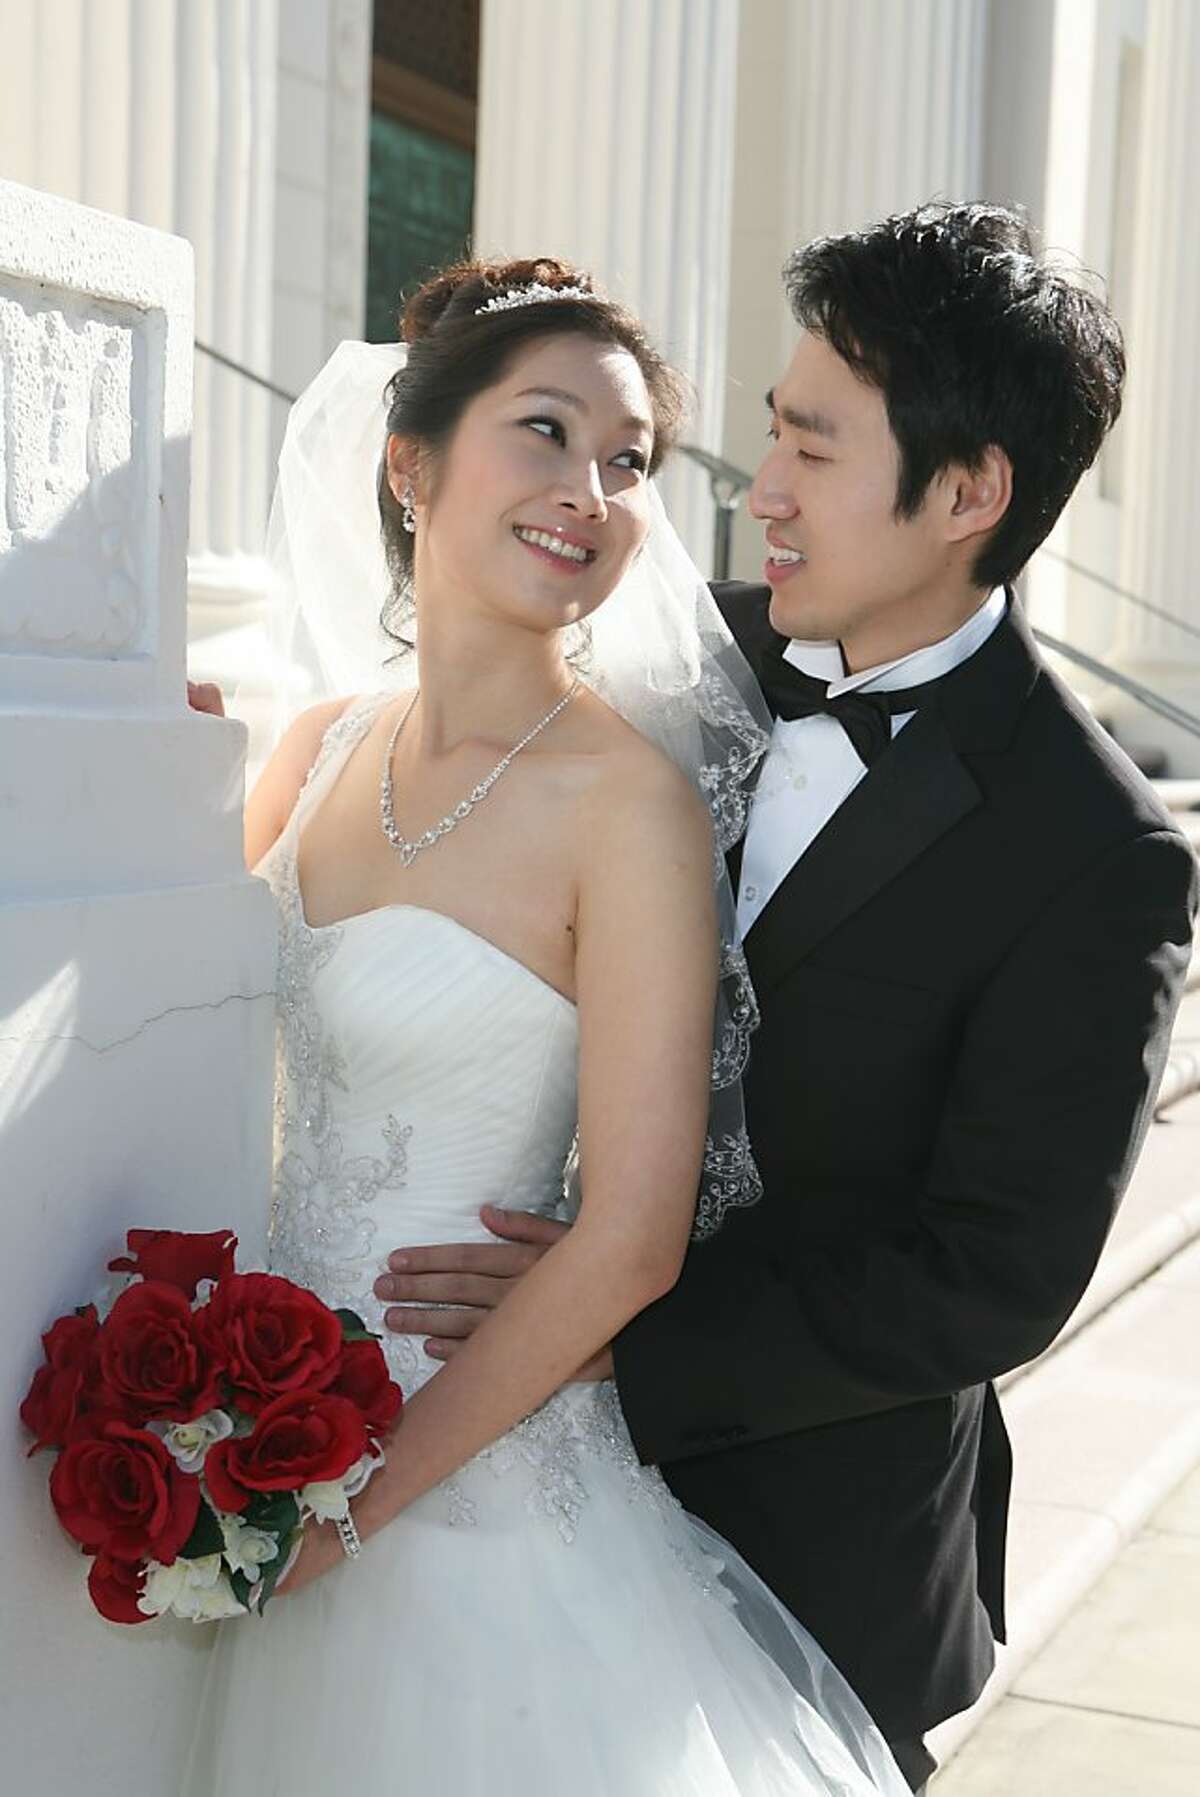 Sarah Kim and her fiance is Joo-Hyung Yi from Santa Clara are getting married on 12-12-12 because her parents got married on 11-11 at 11:11 in 1976.